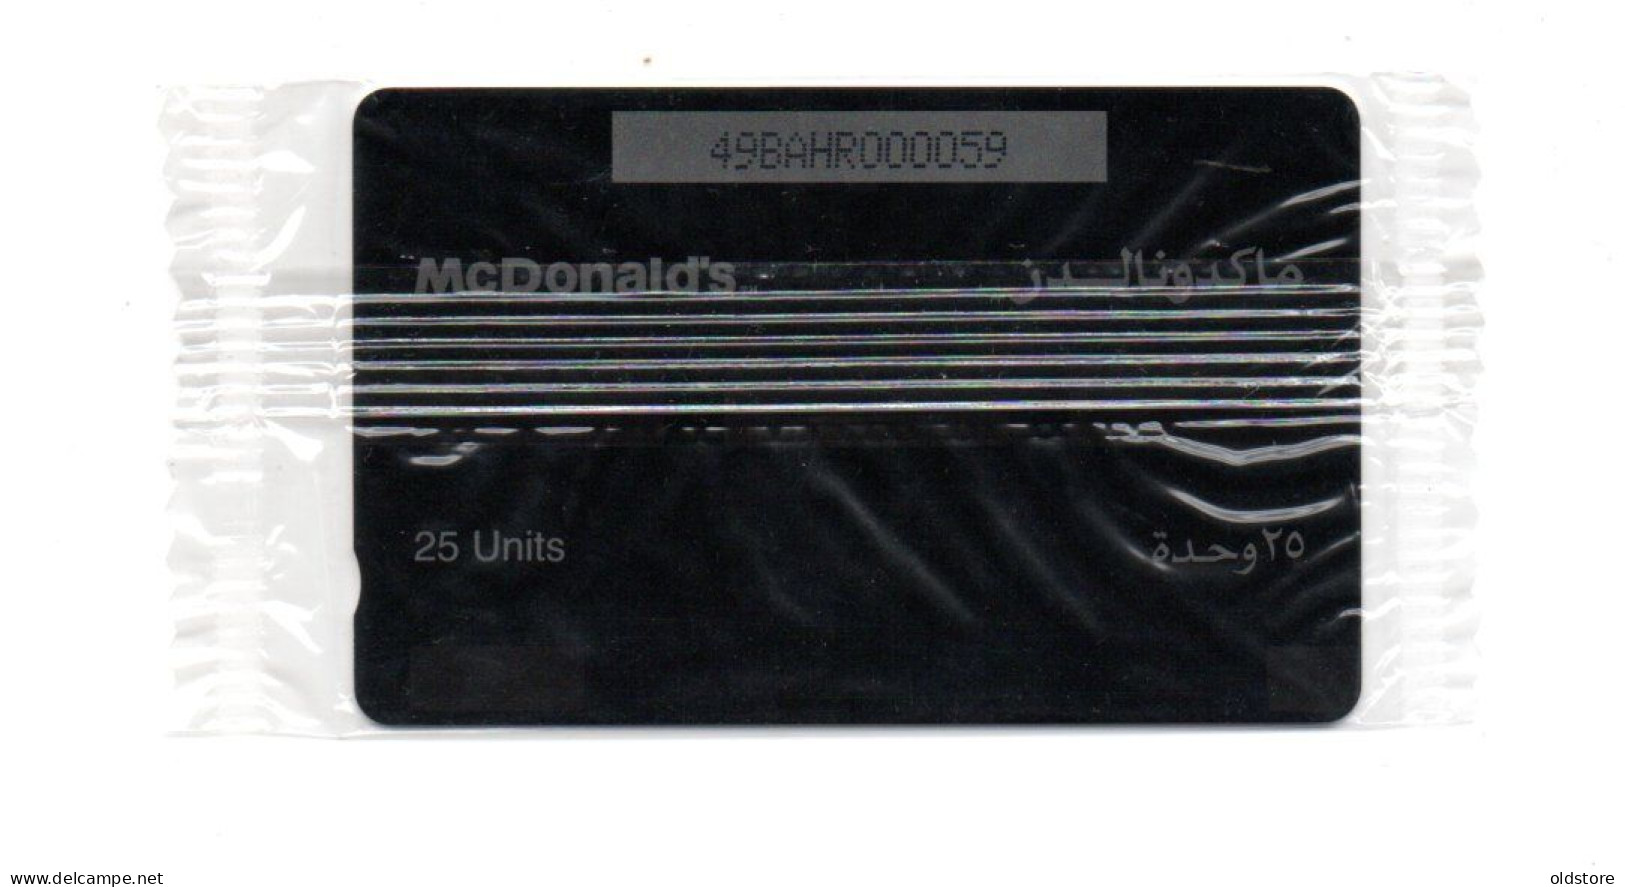 Bahrain Phonecards - Bahrain McDonald's Restaurant Offer Card Mint With Low Serial Number 000059  - Batelco -  ND 2001 - Bahrain